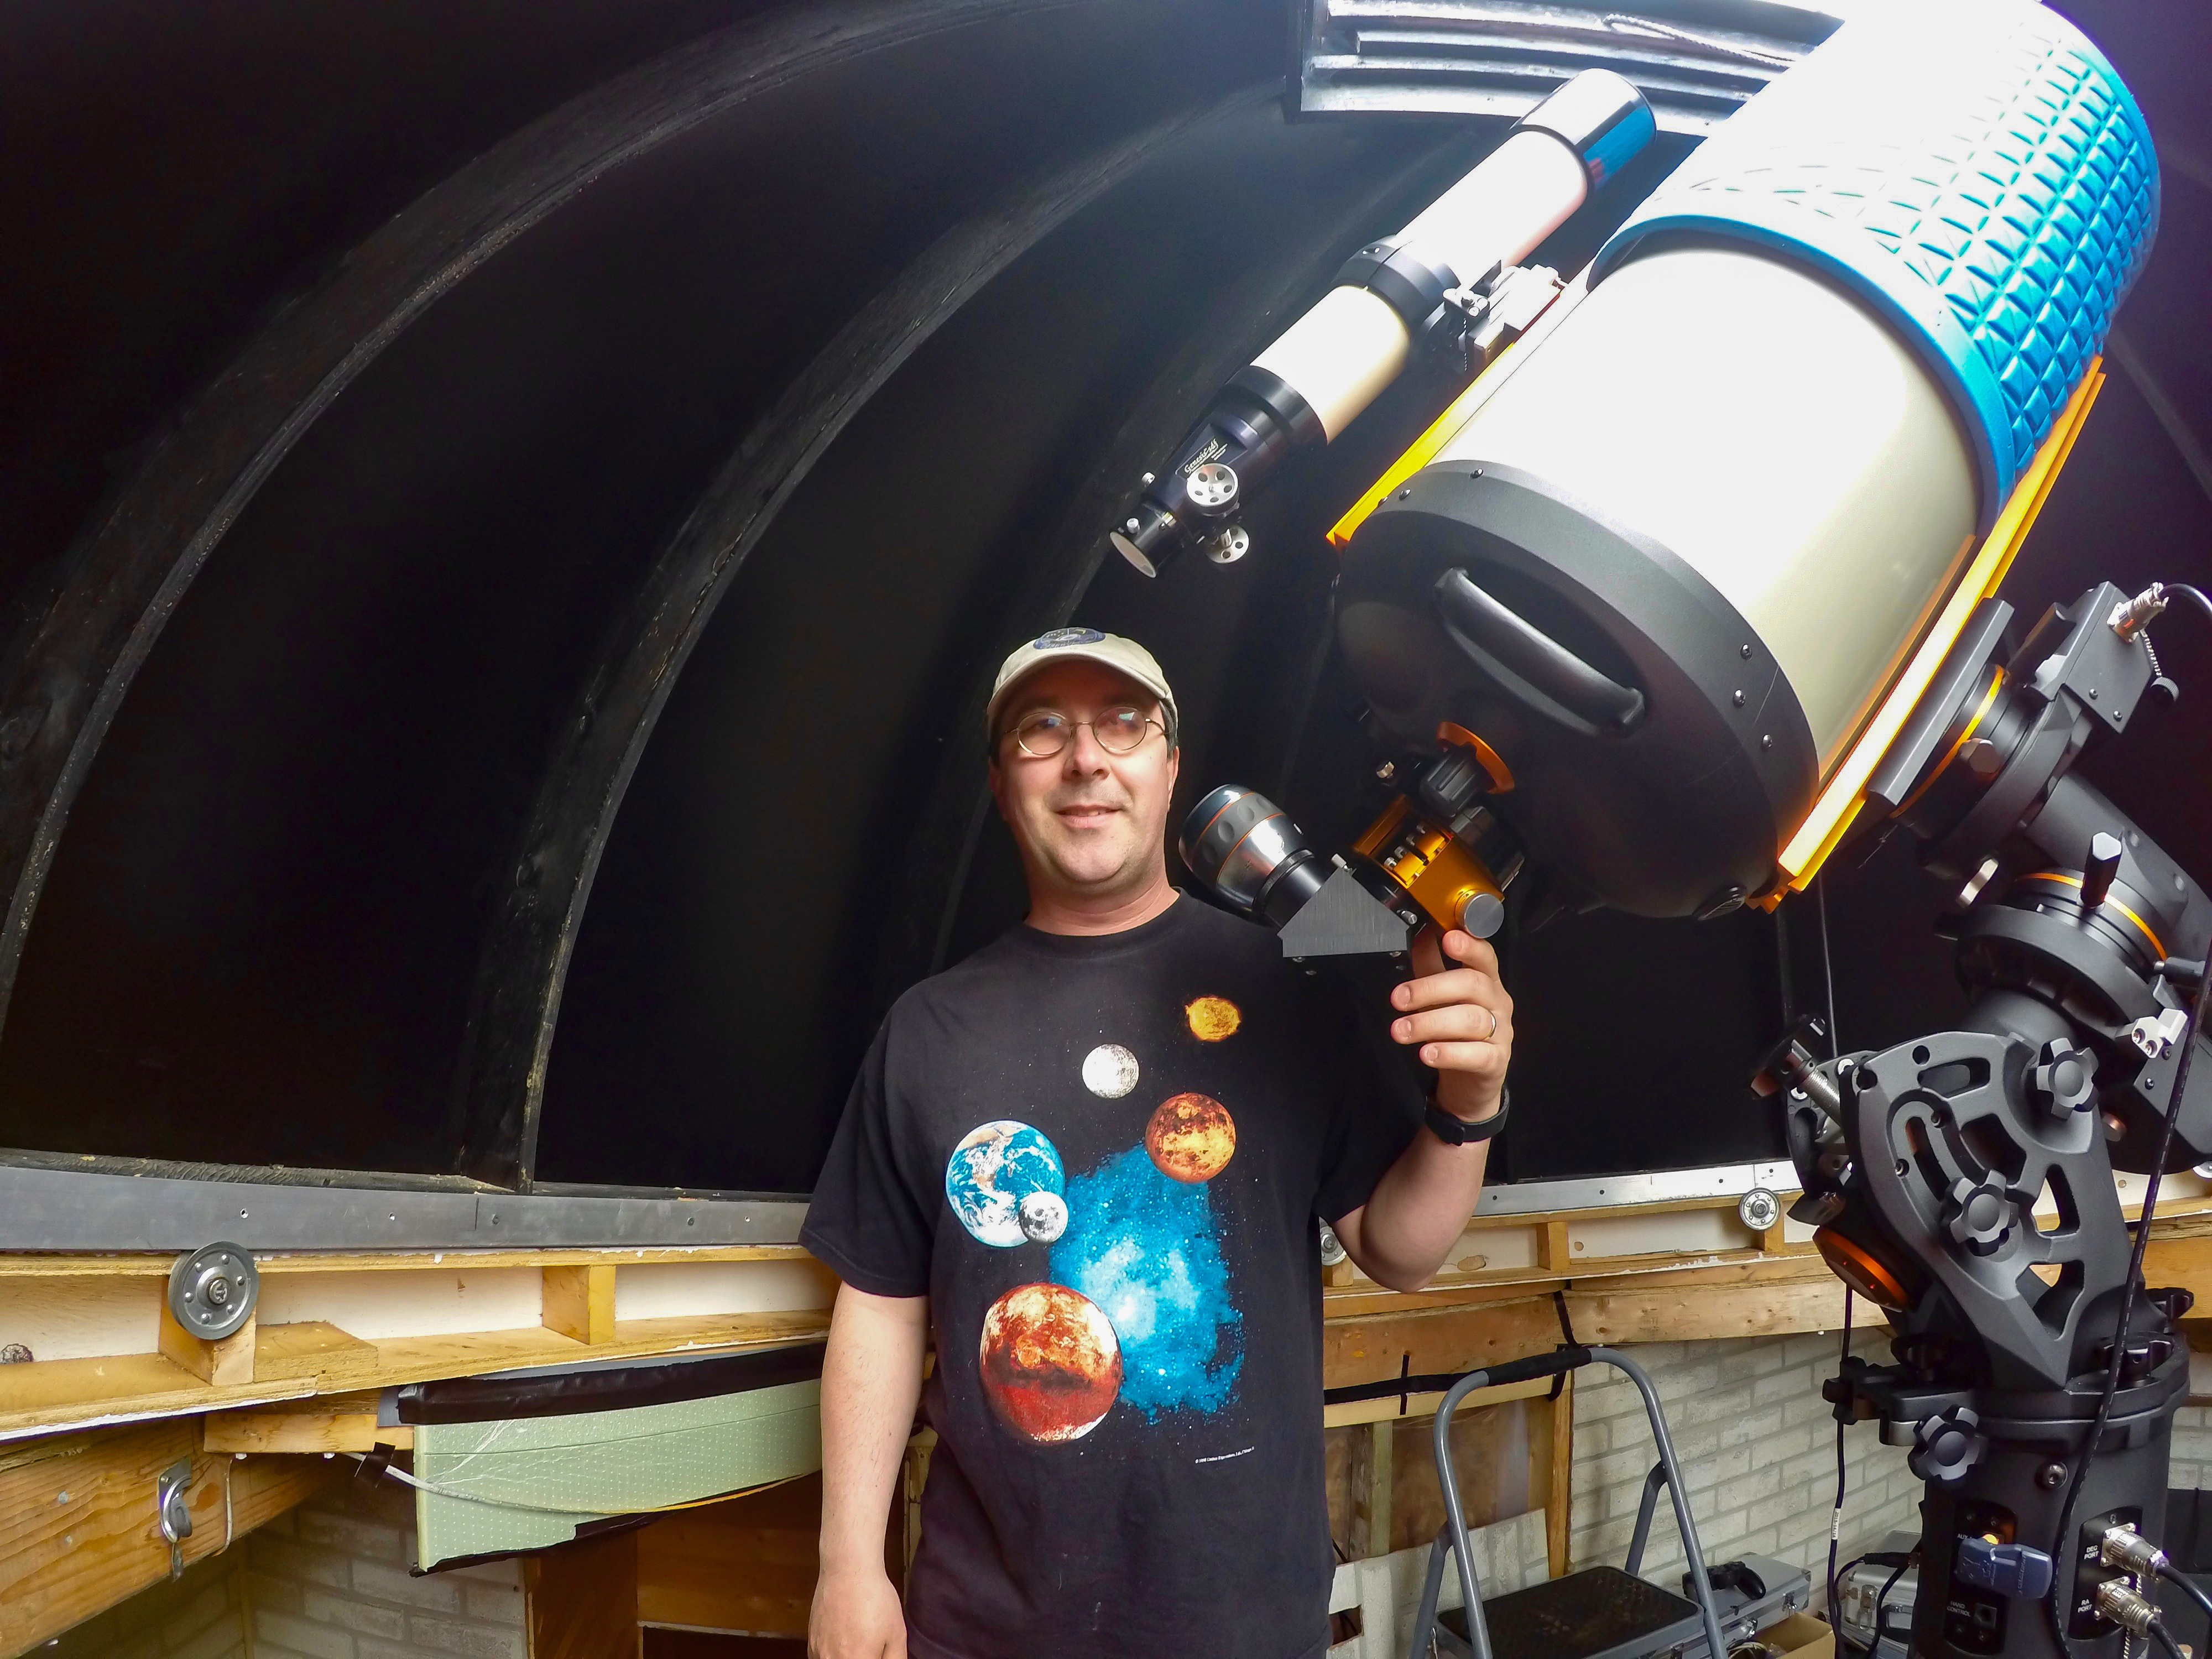 Visually Impaired Amateur Astronomer Helps Everyone See the Cosmos Space